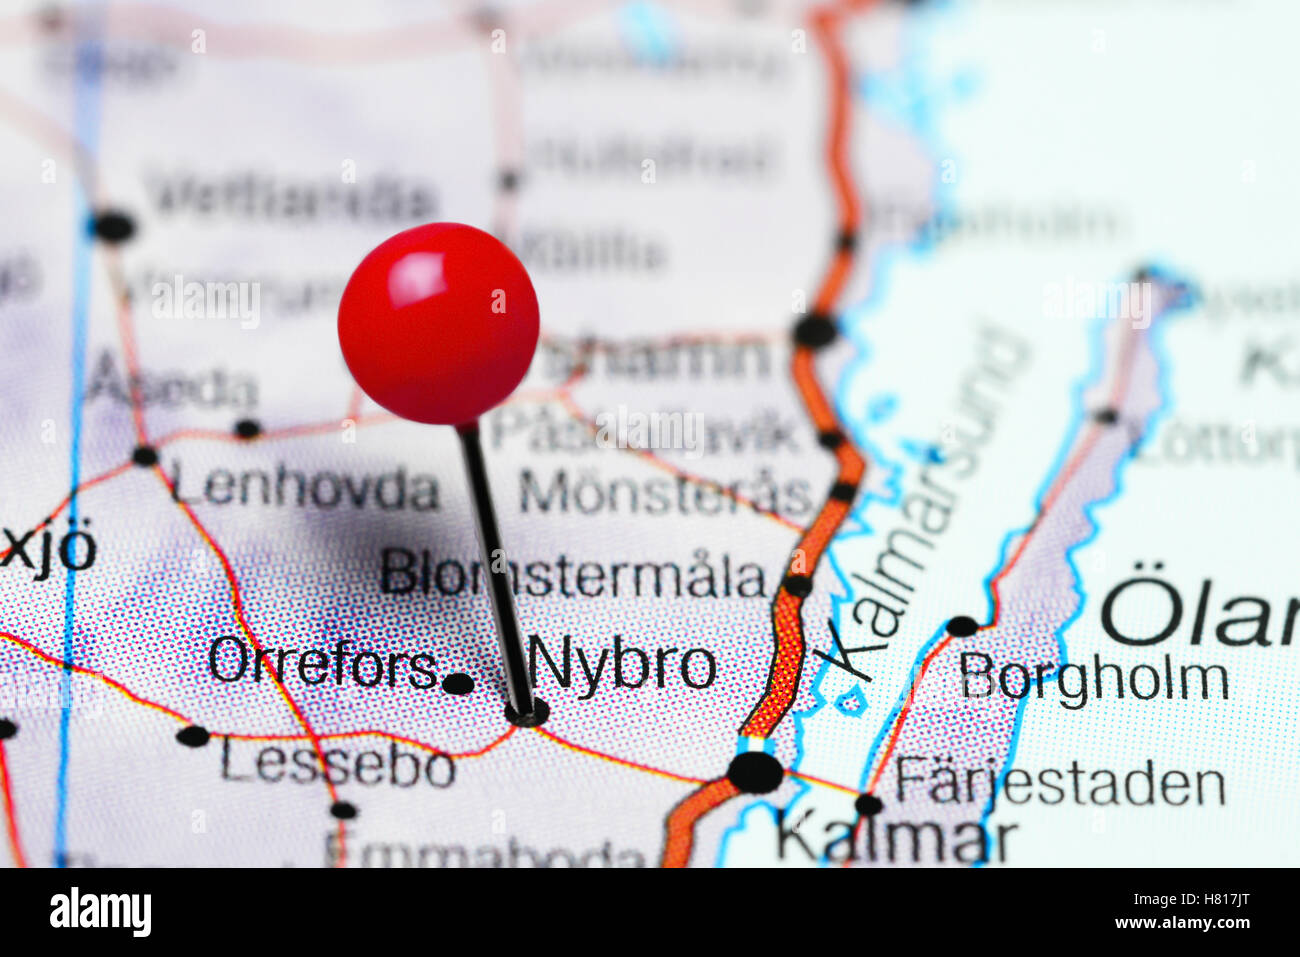 Nybro pinned on a map of Sweden Stock Photo